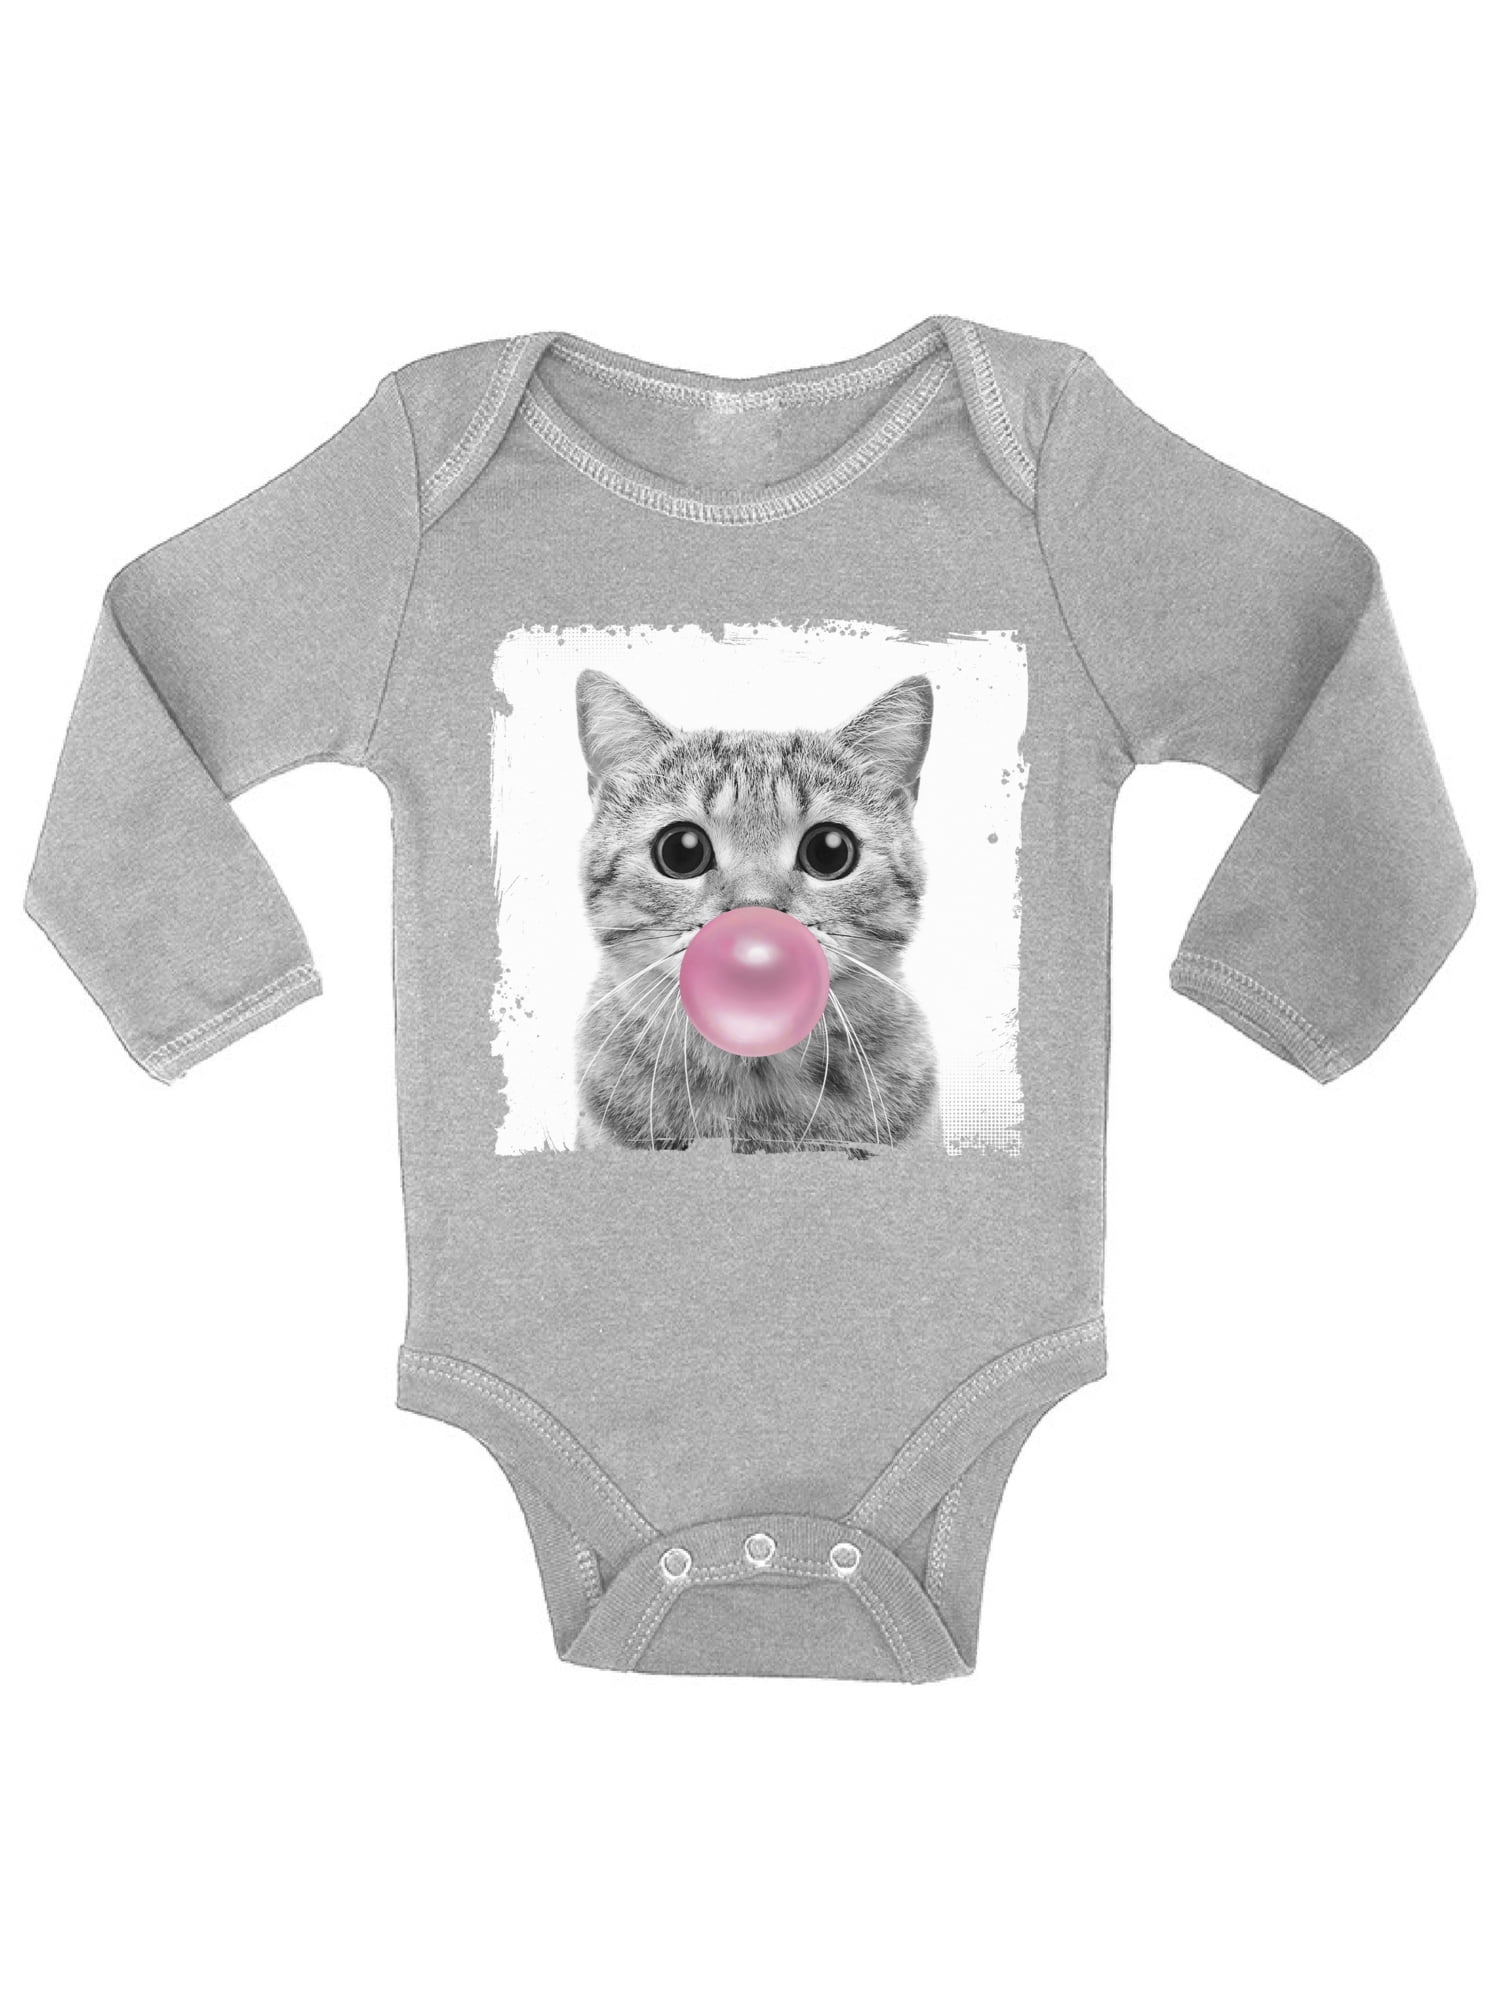 Awkward Styles Cat One Piece Baby Girl Clothes Baby Boy Clothing Cute Animal 